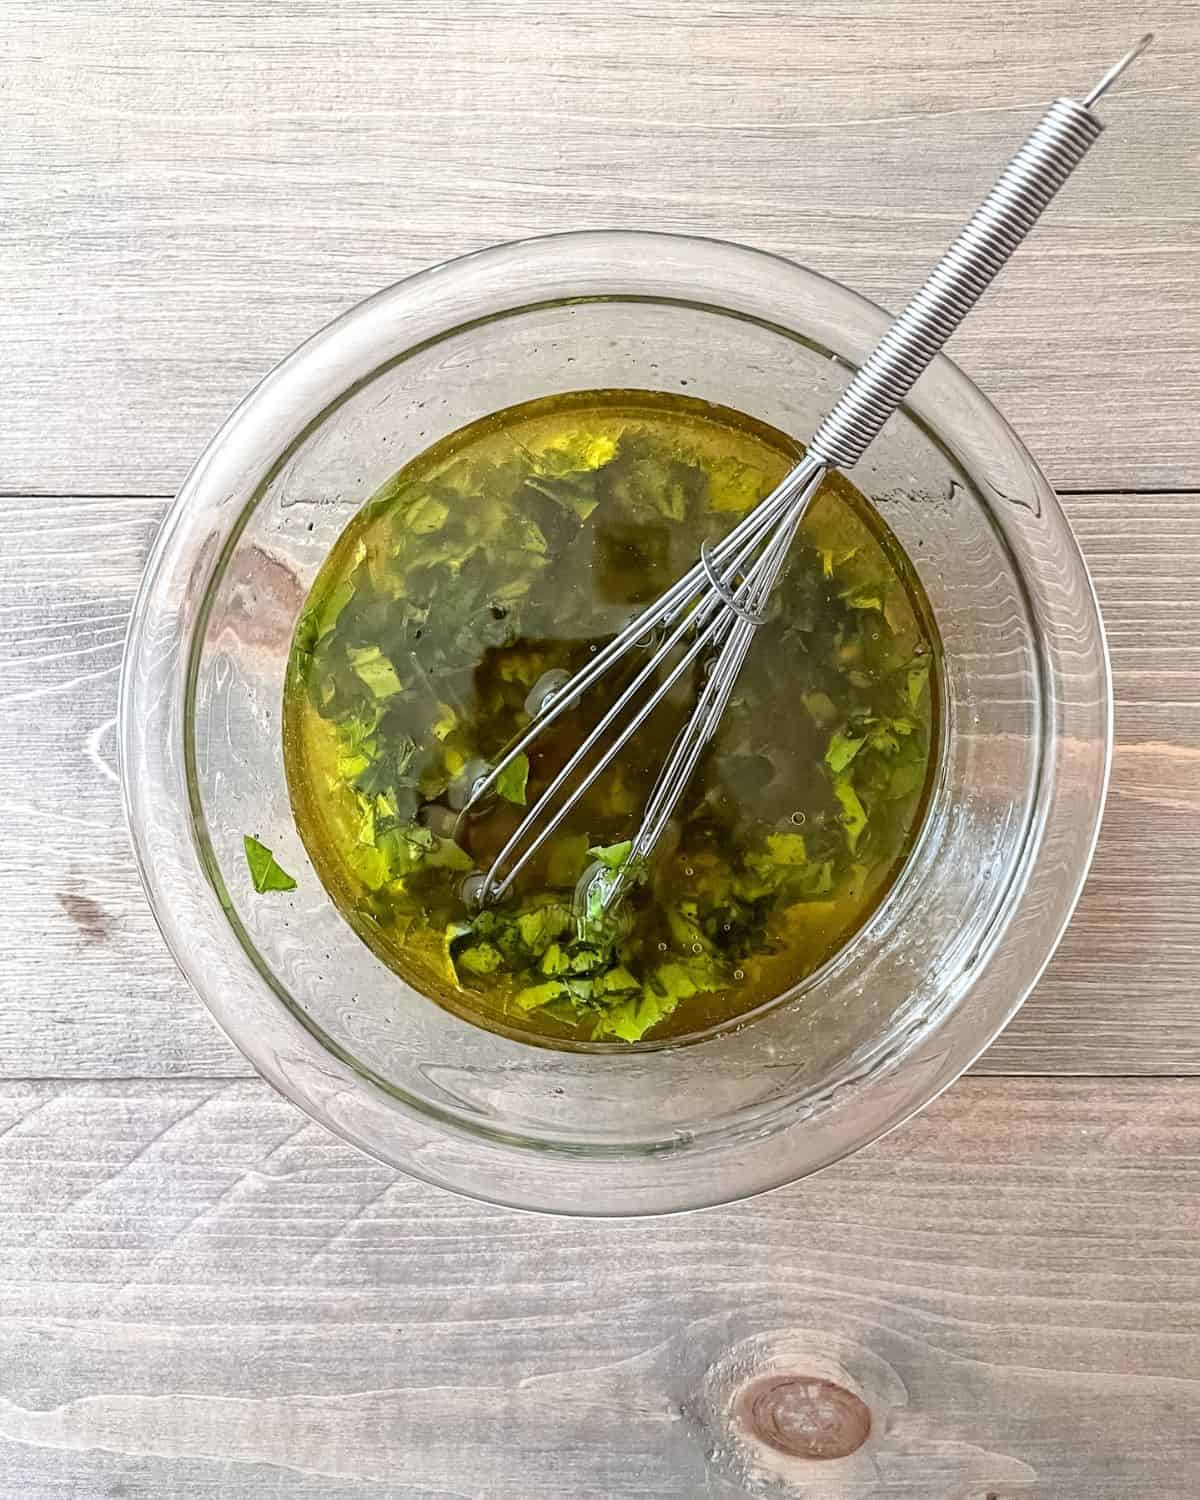 Clear glass bowl of the vegetable marinade and a whisk.